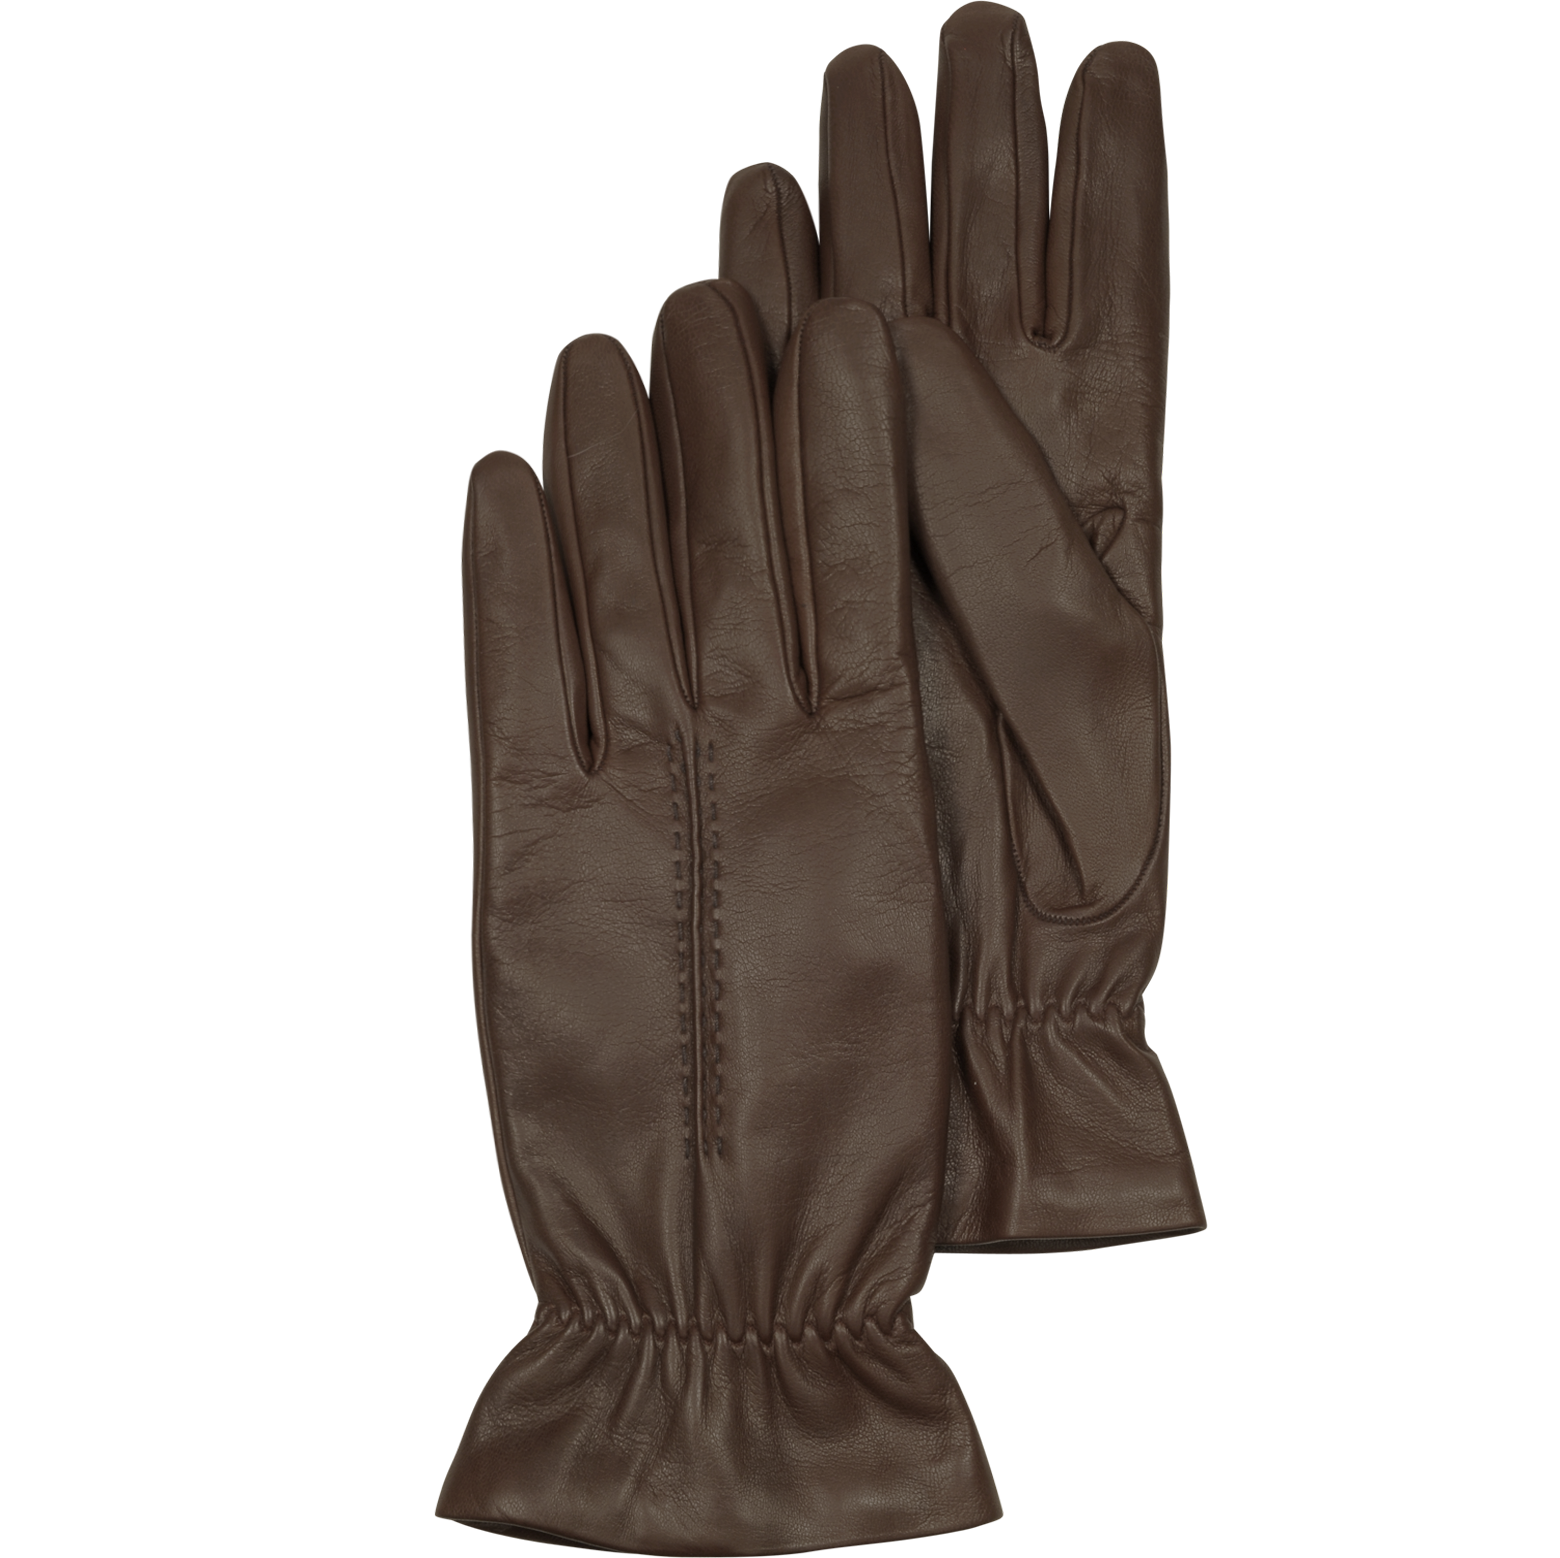 Chocolate Brown Leather Women's Gloves w/Wool Lining